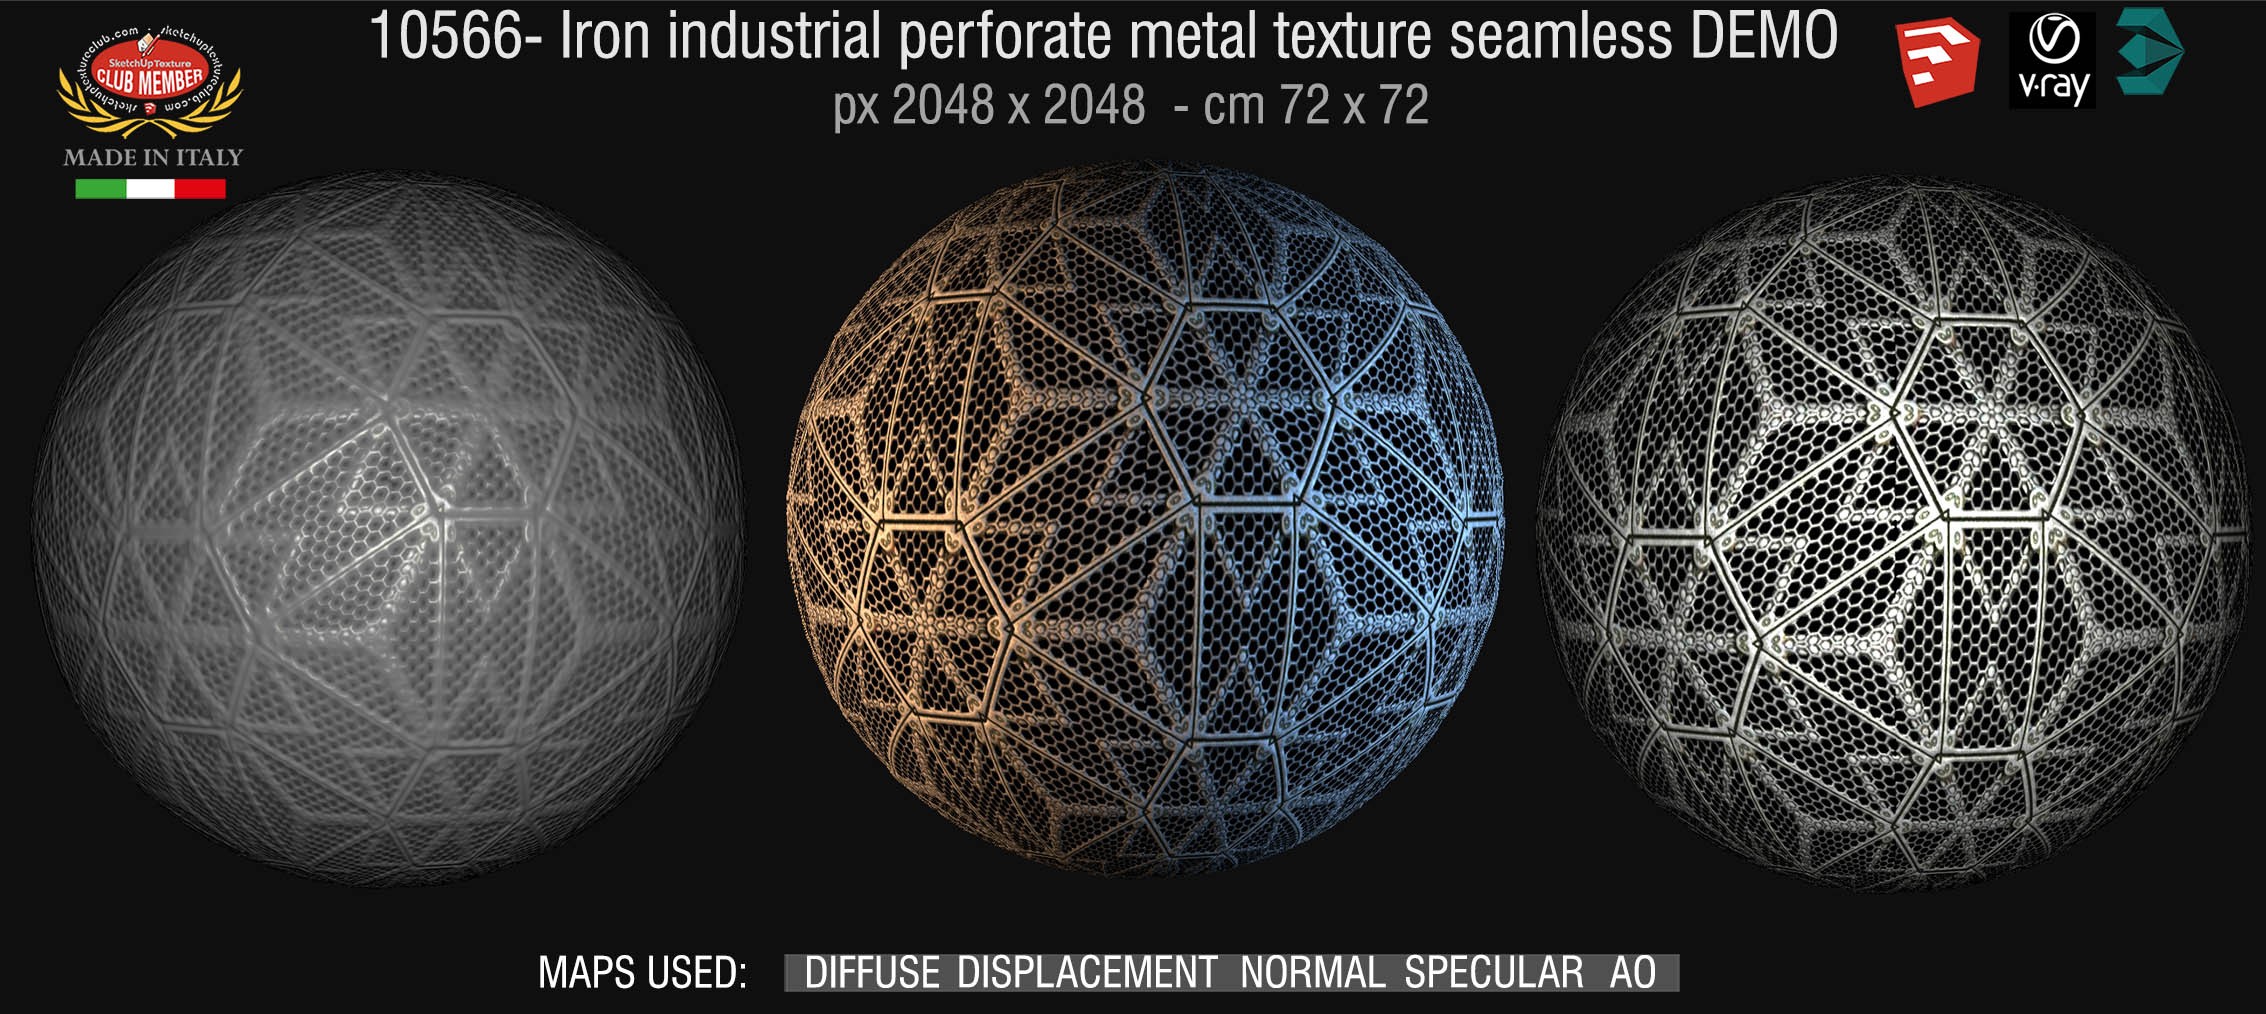 10566 HR Iron industrial perforate metal texture seamless + maps DEMO